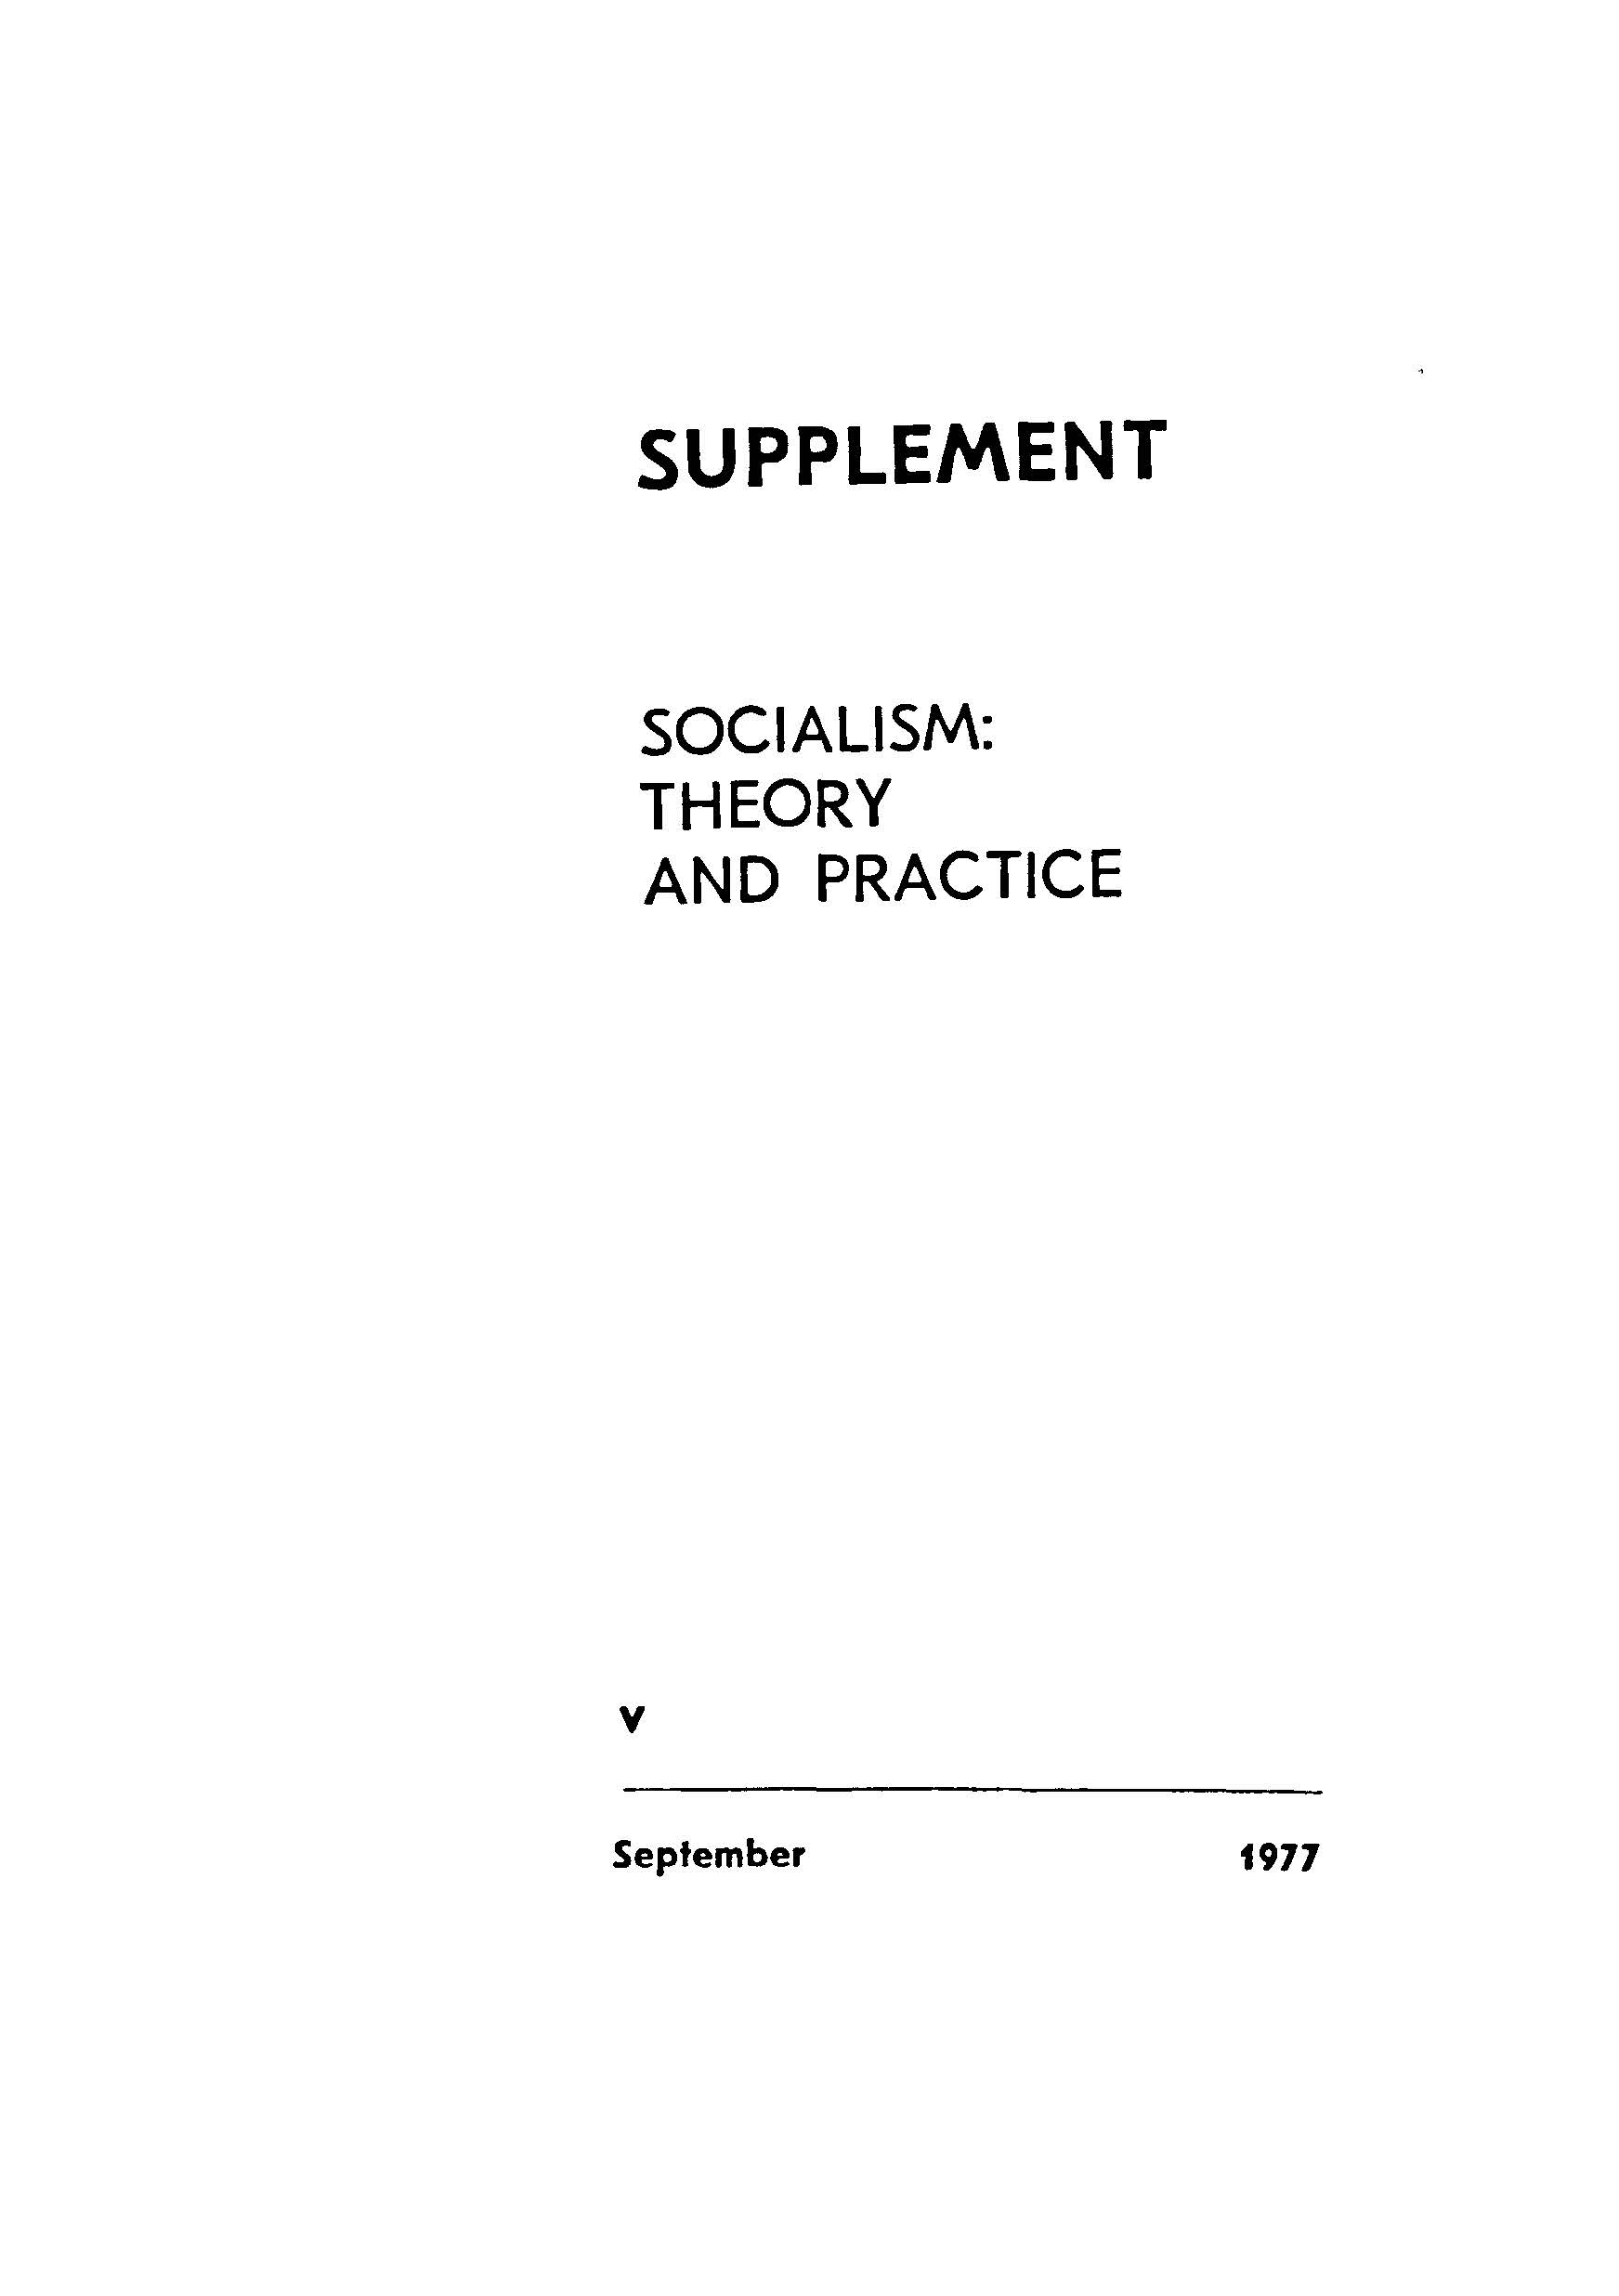 Supplement socialism:theory and practice (septonber-v 19977)